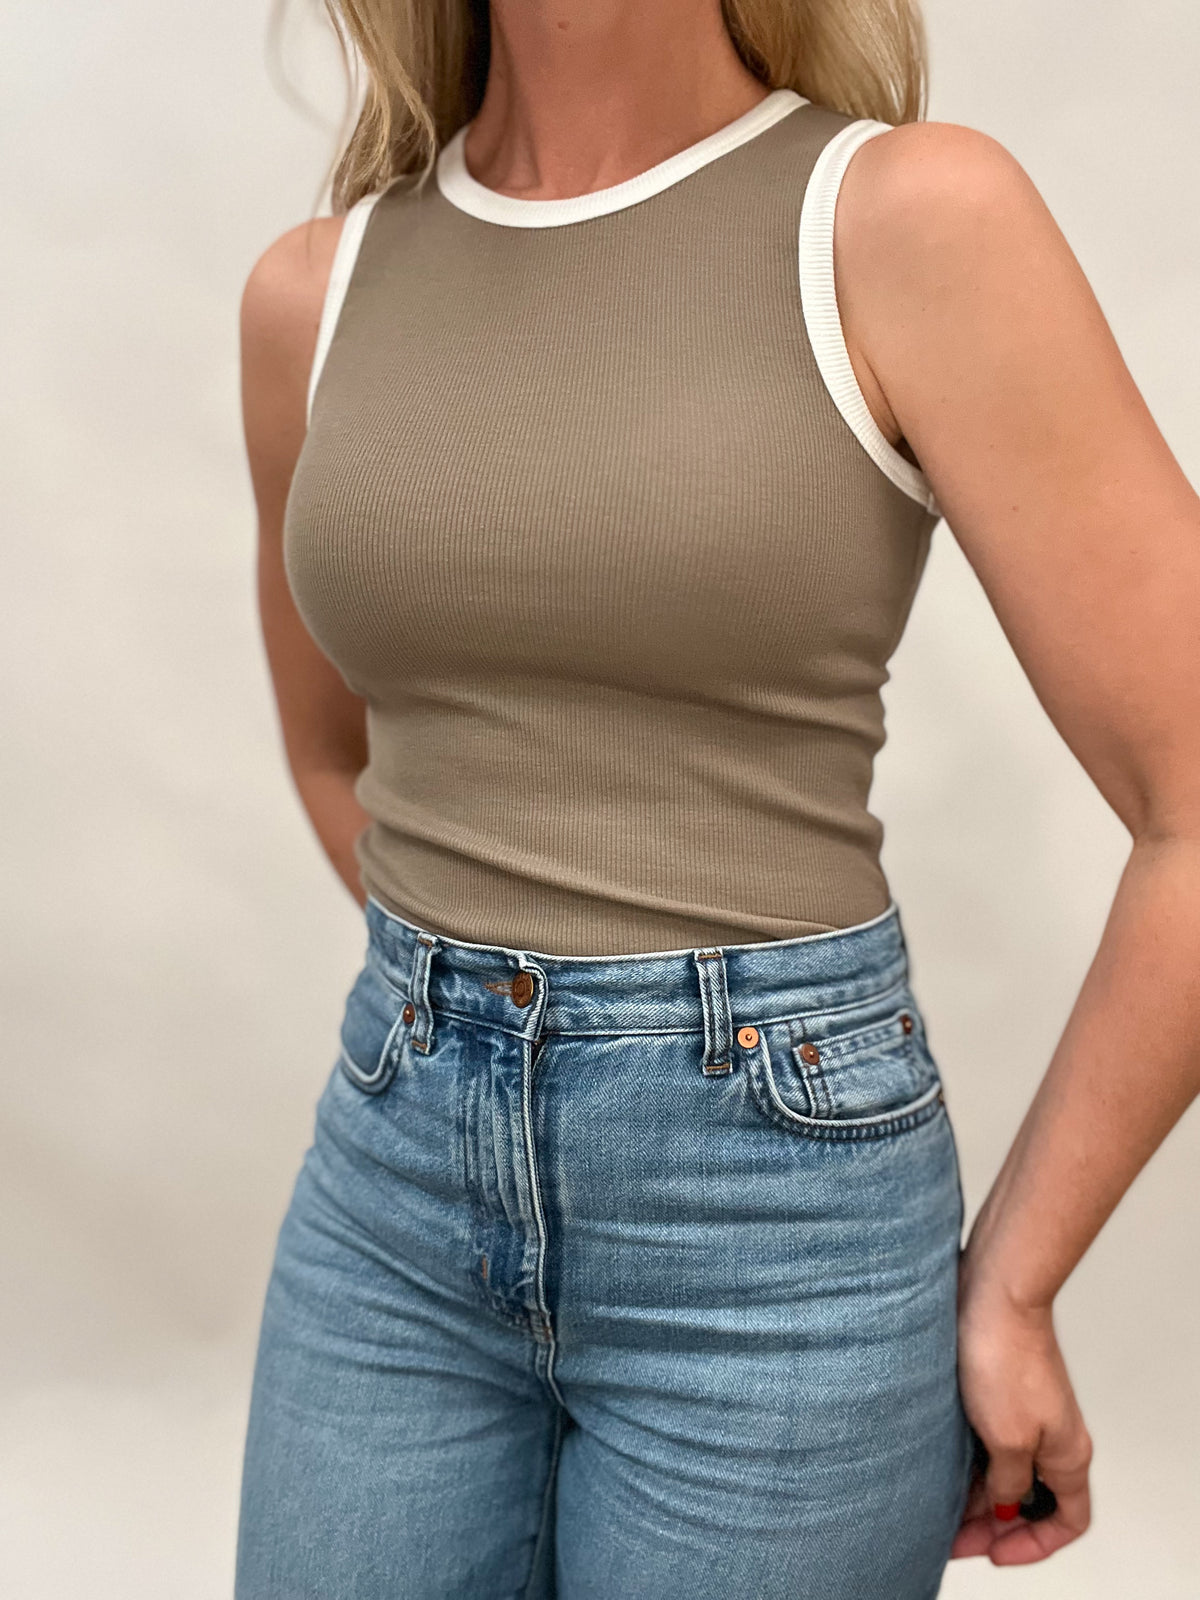 Get ready for summer vibes with our sandy shores tan fitted ribbed sleeveless tank! The bright white edging on the neck and sleeves adds a fresh pop to this effortlessly stylish piece. Perfect for pairing with your favorite denim shorts or a flowy skirt for a relaxed and chic look.